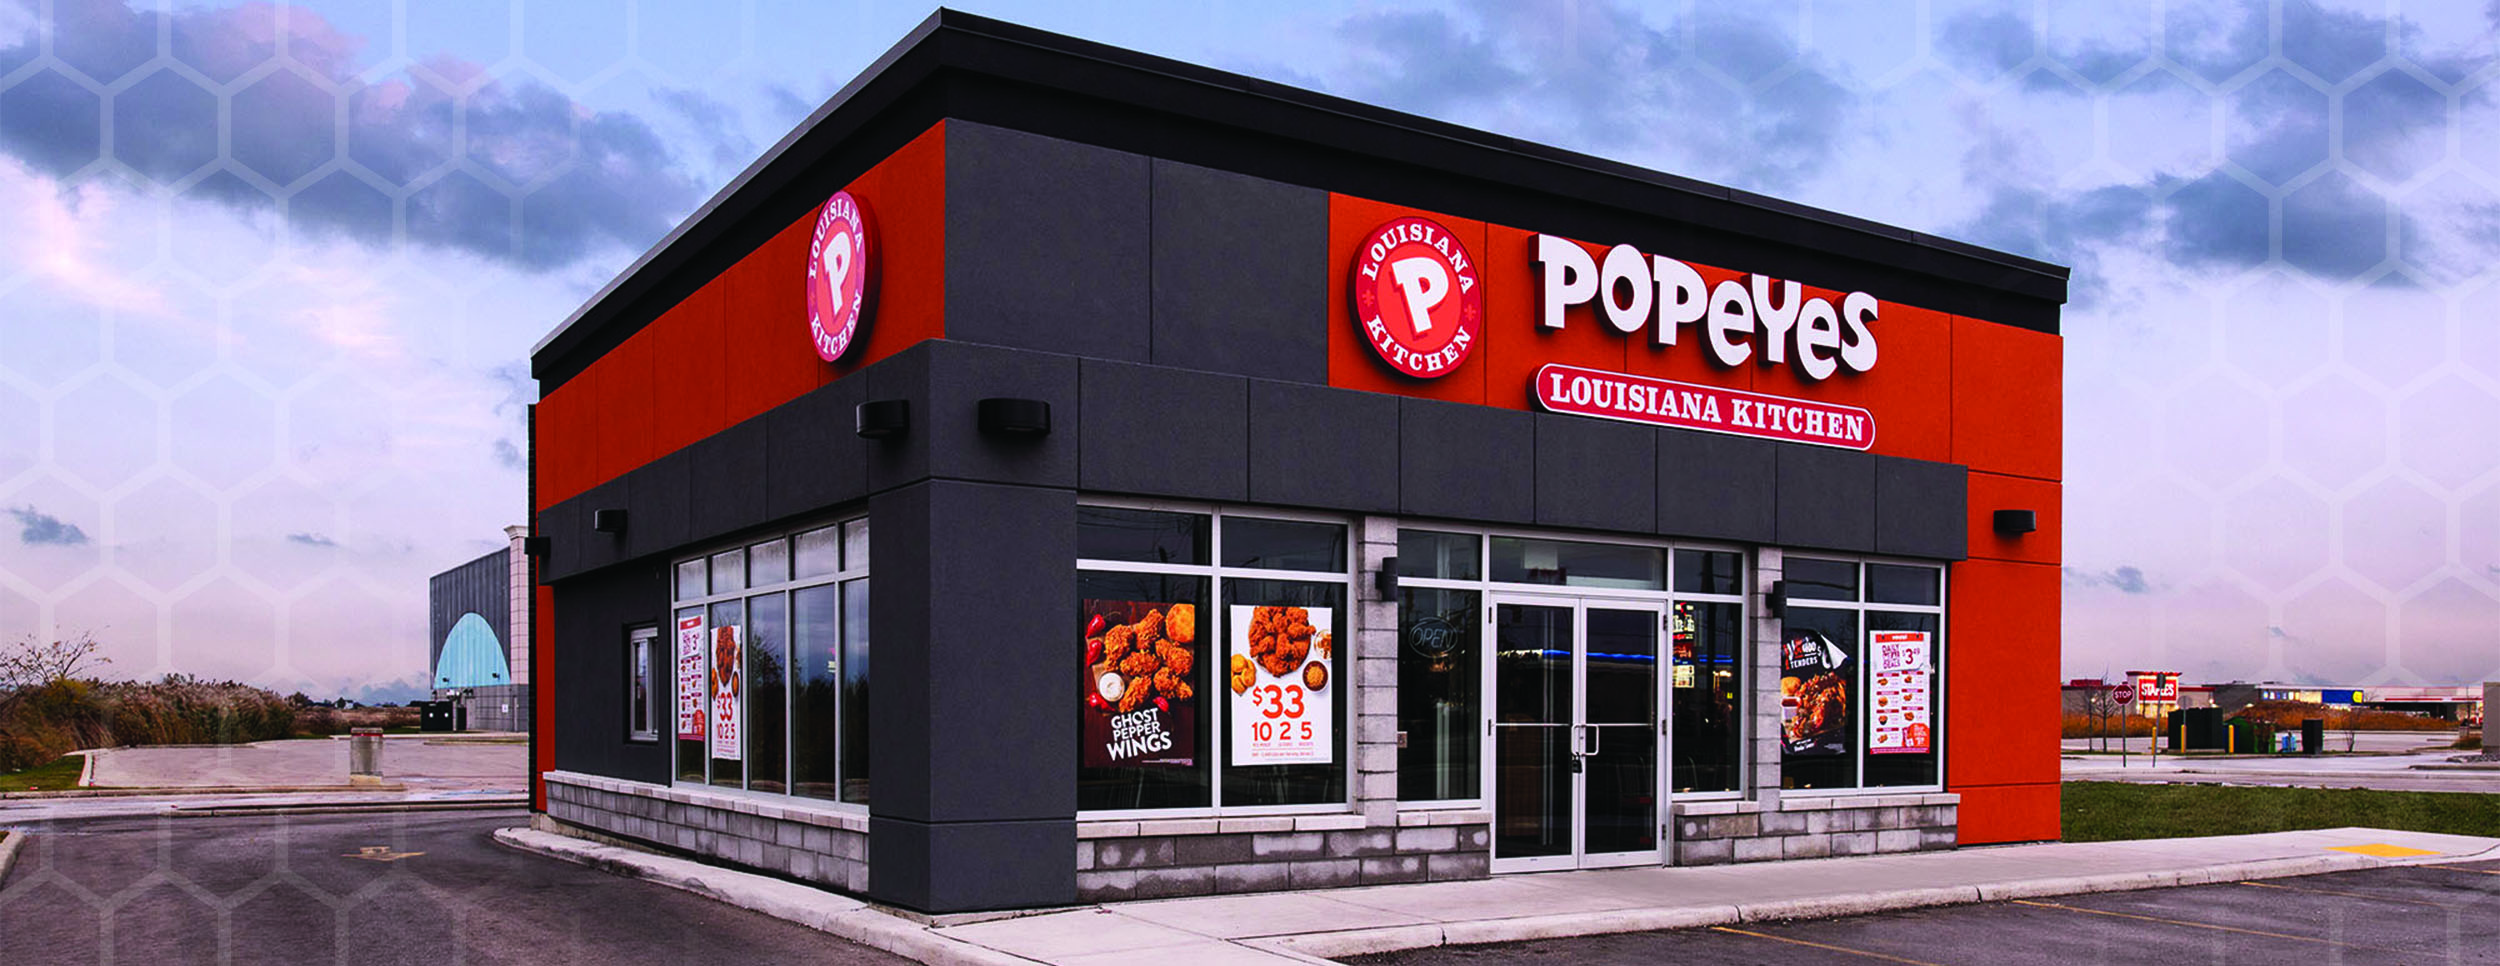 Exterior Rendering of a Popeyes Restaurant at Sunset. Dark Grey brick with pops of Red along the top and down the right side of the building. Windows around the front door.